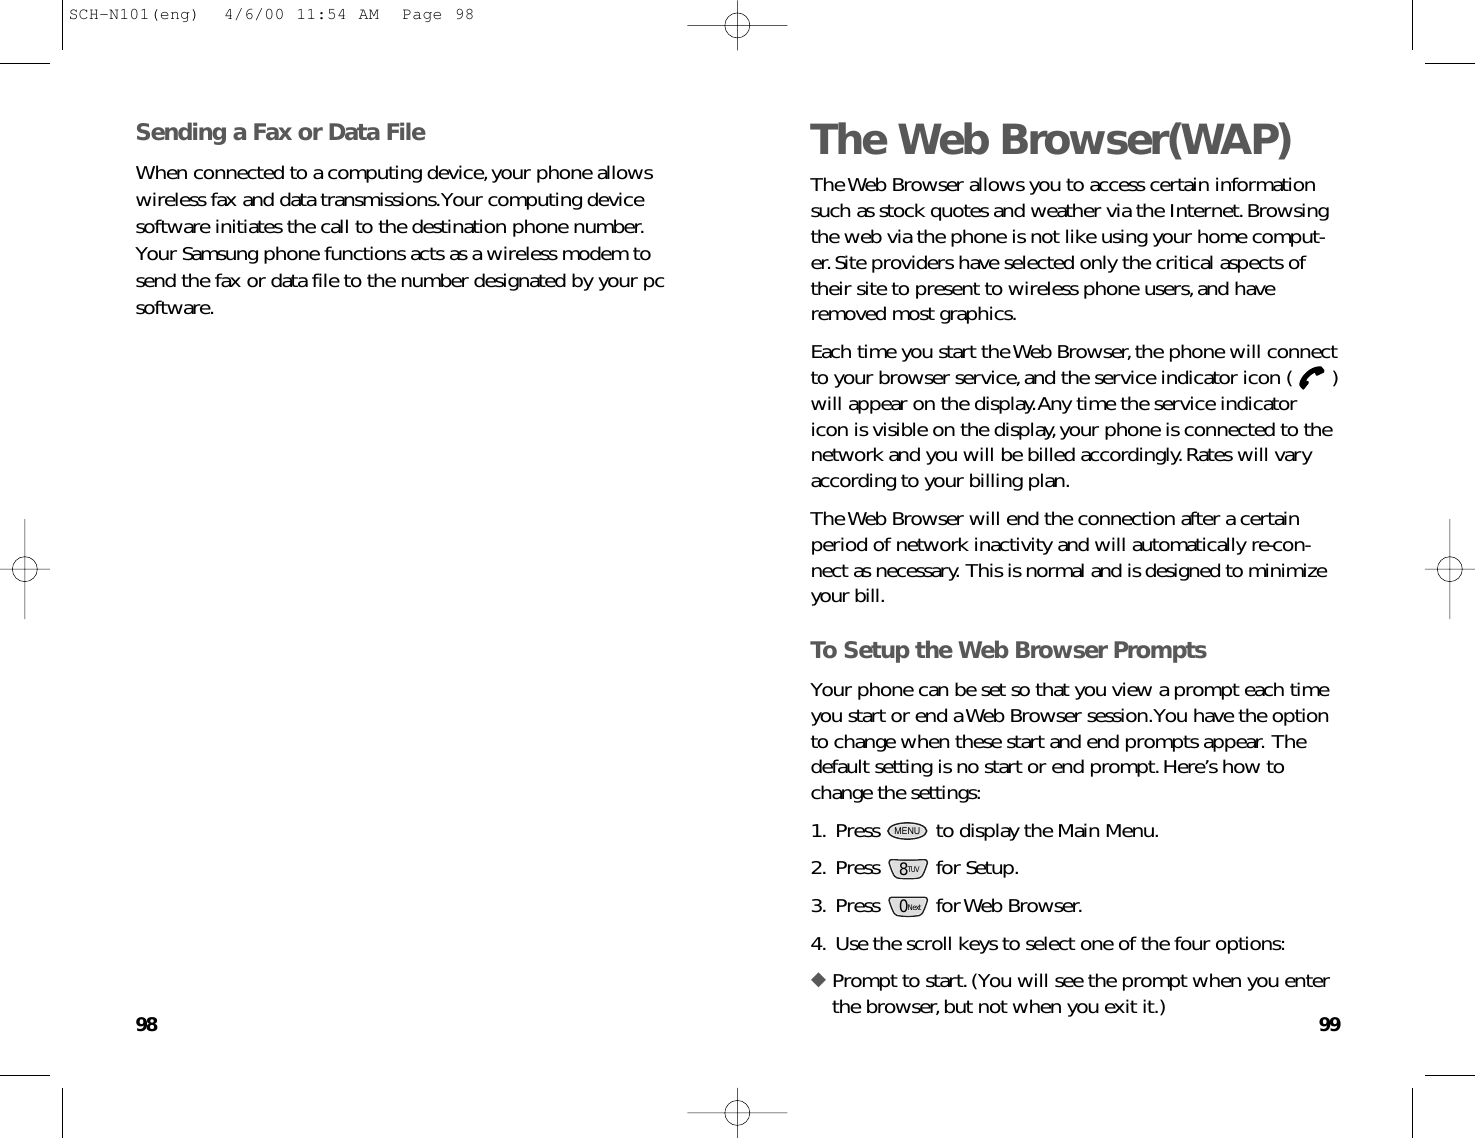 9998The Web Browser(WAP)The Web Browser allows you to access certain informationsuch as stock quotes and weather via the Internet.Browsingthe web via the phone is not like using your home comput-er.Site providers have selected only the critical aspects oftheir site to present to wireless phone users,and haveremoved most graphics.Each time you start the Web Browser,the phone will connectto your browser service,and the service indicator icon ( )will appear on the display.Any time the service indicatoricon is visible on the display,your phone is connected to thenetwork and you will be billed accordingly.Rates will varyaccording to your billing plan.The Web Browser will end the connection after a certainperiod of network inactivity and will automatically re-con-nect as necessary. This is normal and is designed to minimizeyour bill.To Setup the Web Browser PromptsYour phone can be set so that you view a prompt each timeyou start or end a Web Browser session.You have the optionto change when these start and end prompts appear. Thedefault setting is no start or end prompt.Here’s how tochange the settings:1. Press  to display the Main Menu.2. Press for Setup.3. Press for Web Browser.4. Use the scroll keys to select one of the four options:◆ Prompt to start.(You will see the prompt when you enterthe browser,but not when you exit it.)0Next8TUVMENUSending a Fax or Data FileWhen connected to a computing device,your phone allowswireless fax and data transmissions.Your computing devicesoftware initiates the call to the destination phone number.Your Samsung phone functions acts as a wireless modem tosend the fax or data file to the number designated by your pcsoftware.SCH-N101(eng)  4/6/00 11:54 AM  Page 98